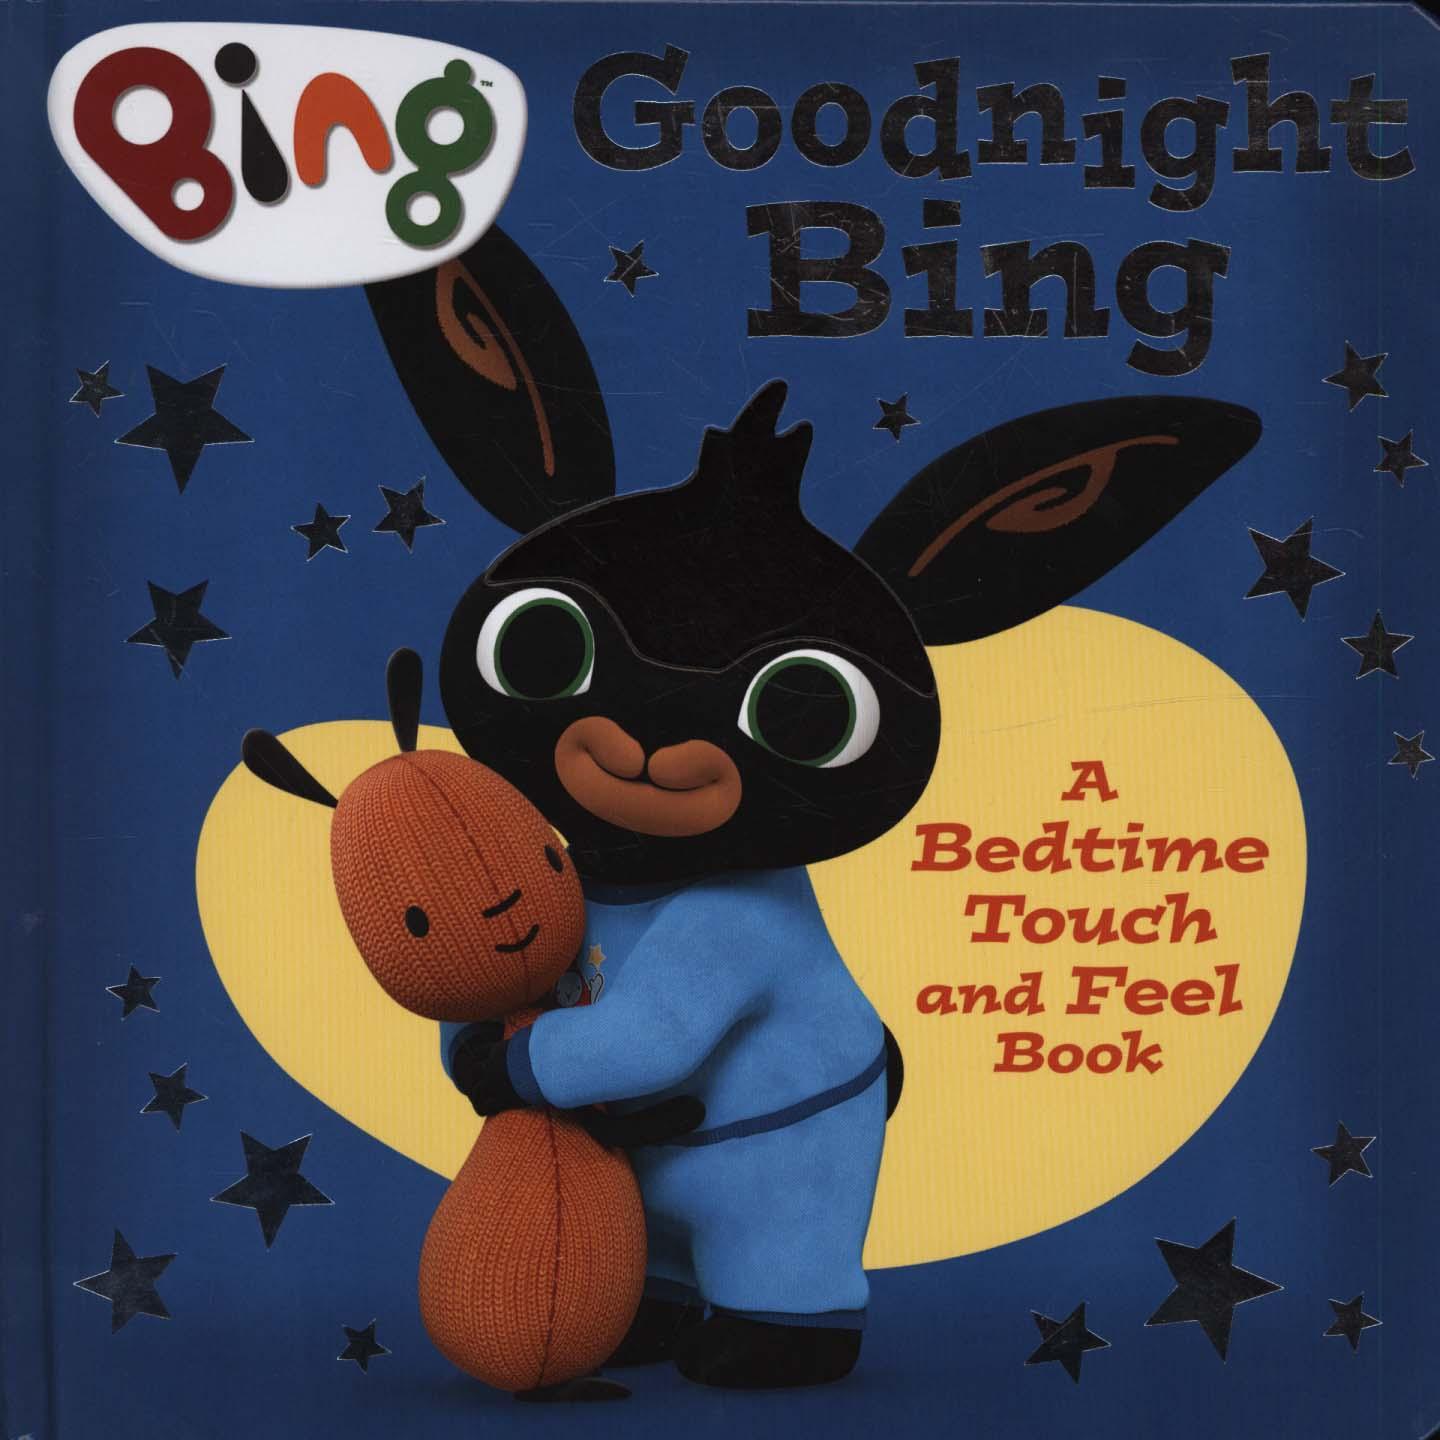 Goodnight, Bing: Touch-and-feel book